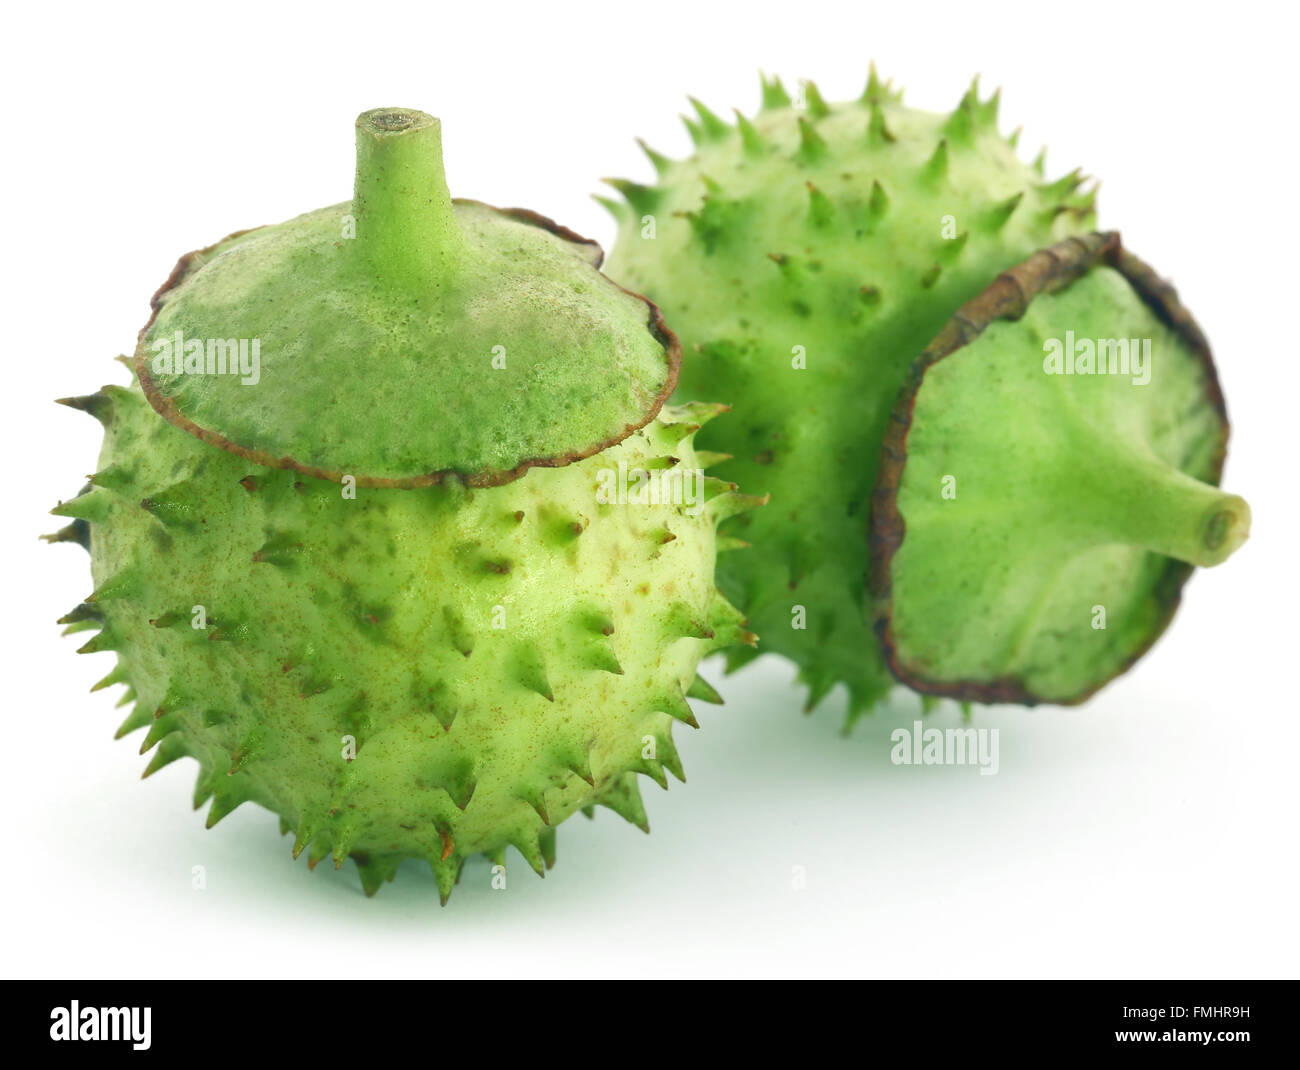 Medicinal Datura fruits over white background Stock Photo